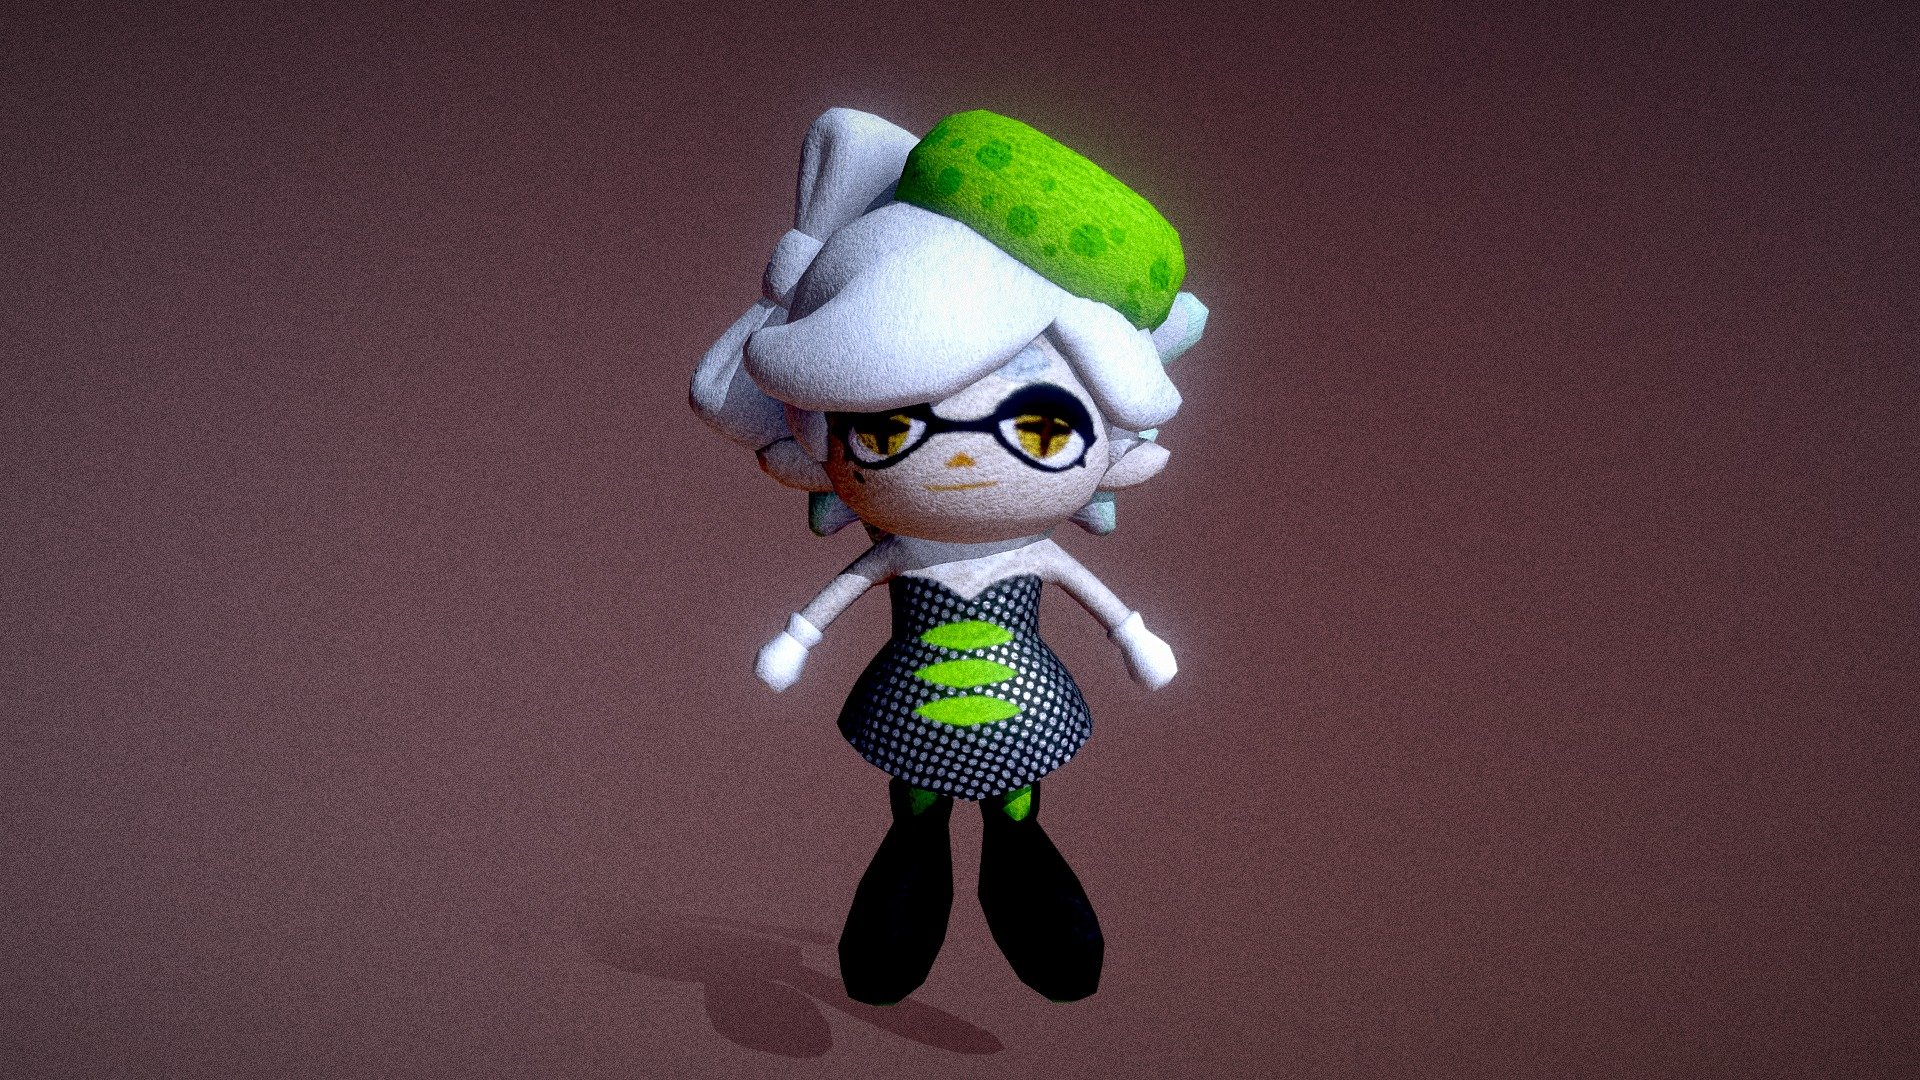 Marie Plush Download Free 3d Model By Mike Inel Mikeinel 2e82054 Sketchfab 3665